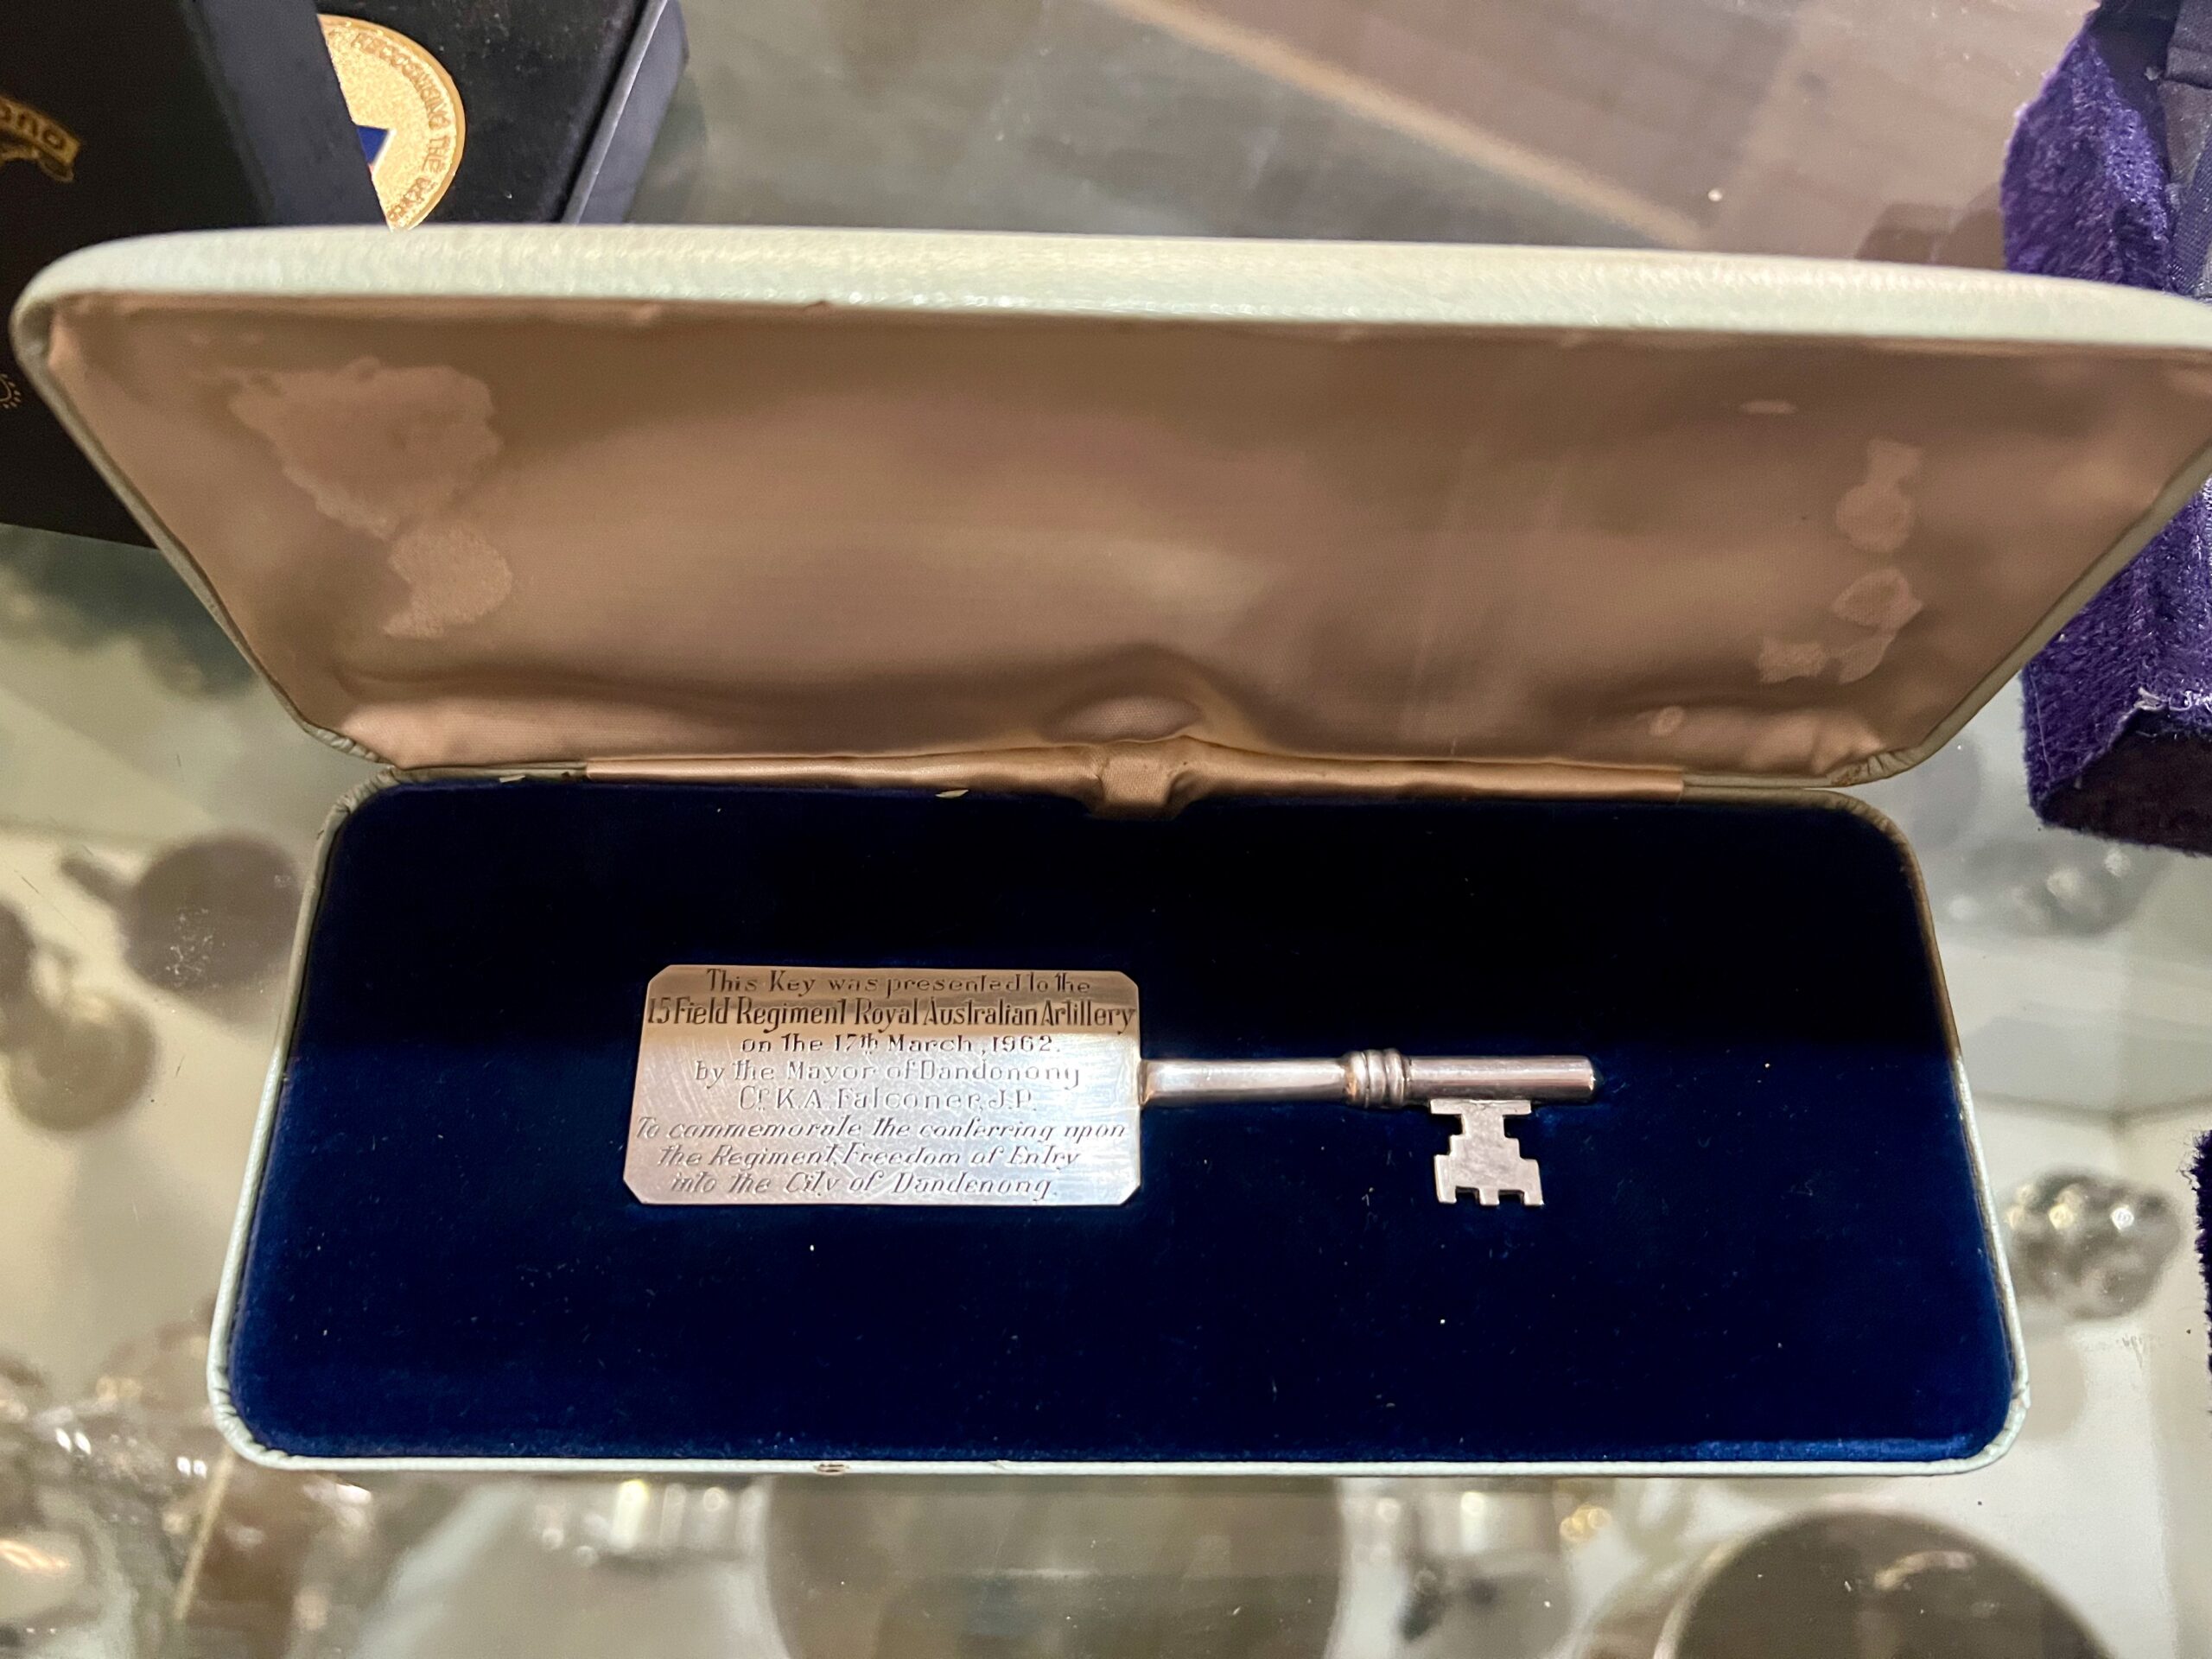 Freedom of Entry Key for Dandenong 1962